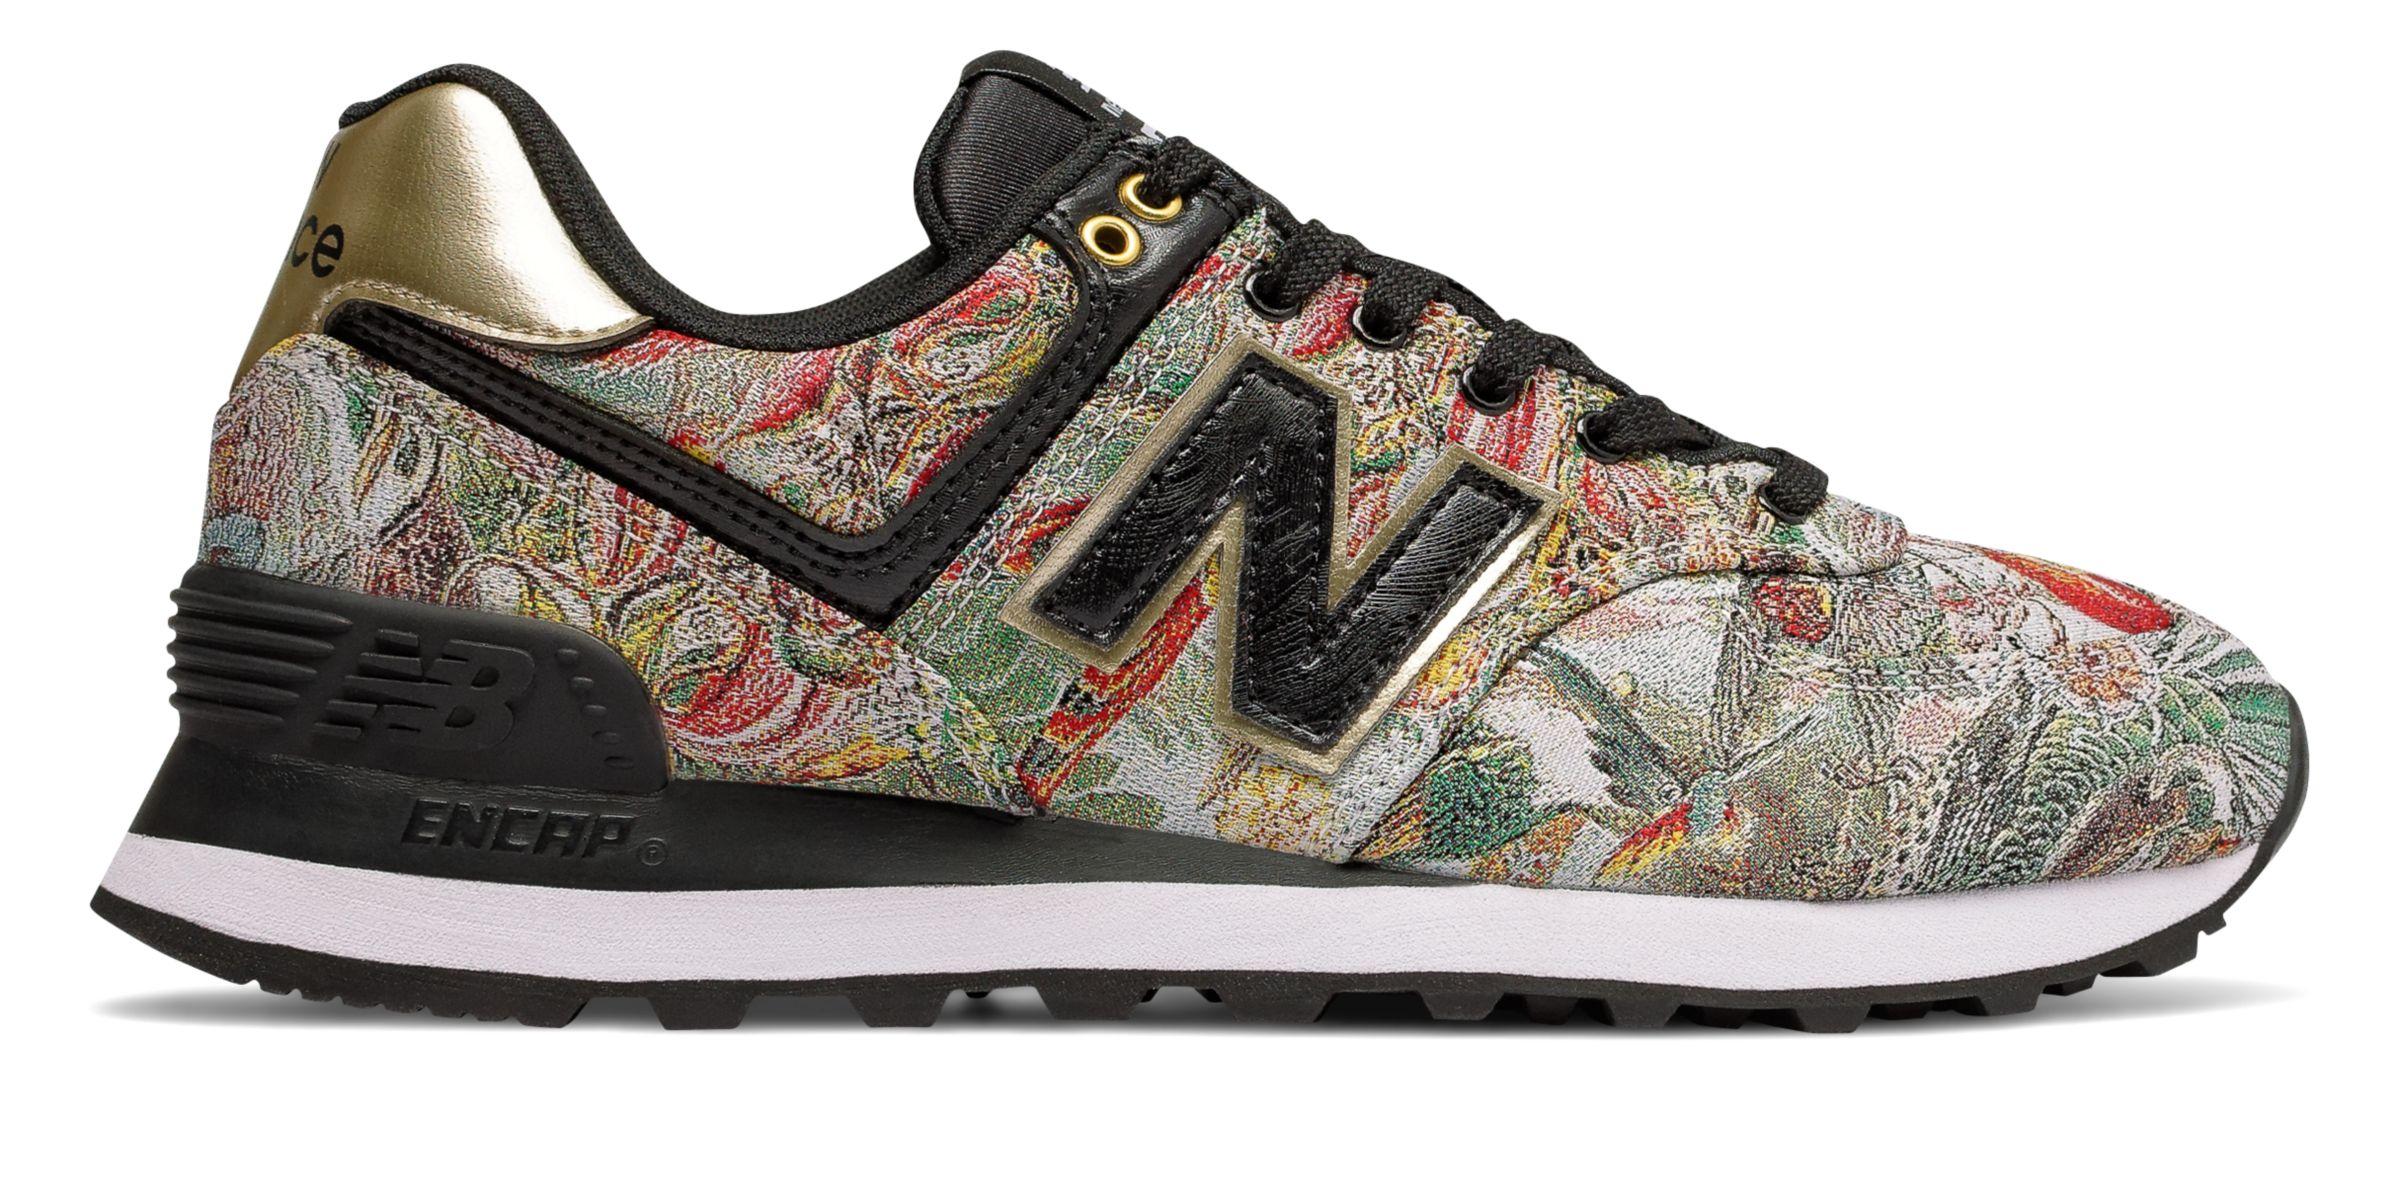 Ananiver new balance 574 floral 